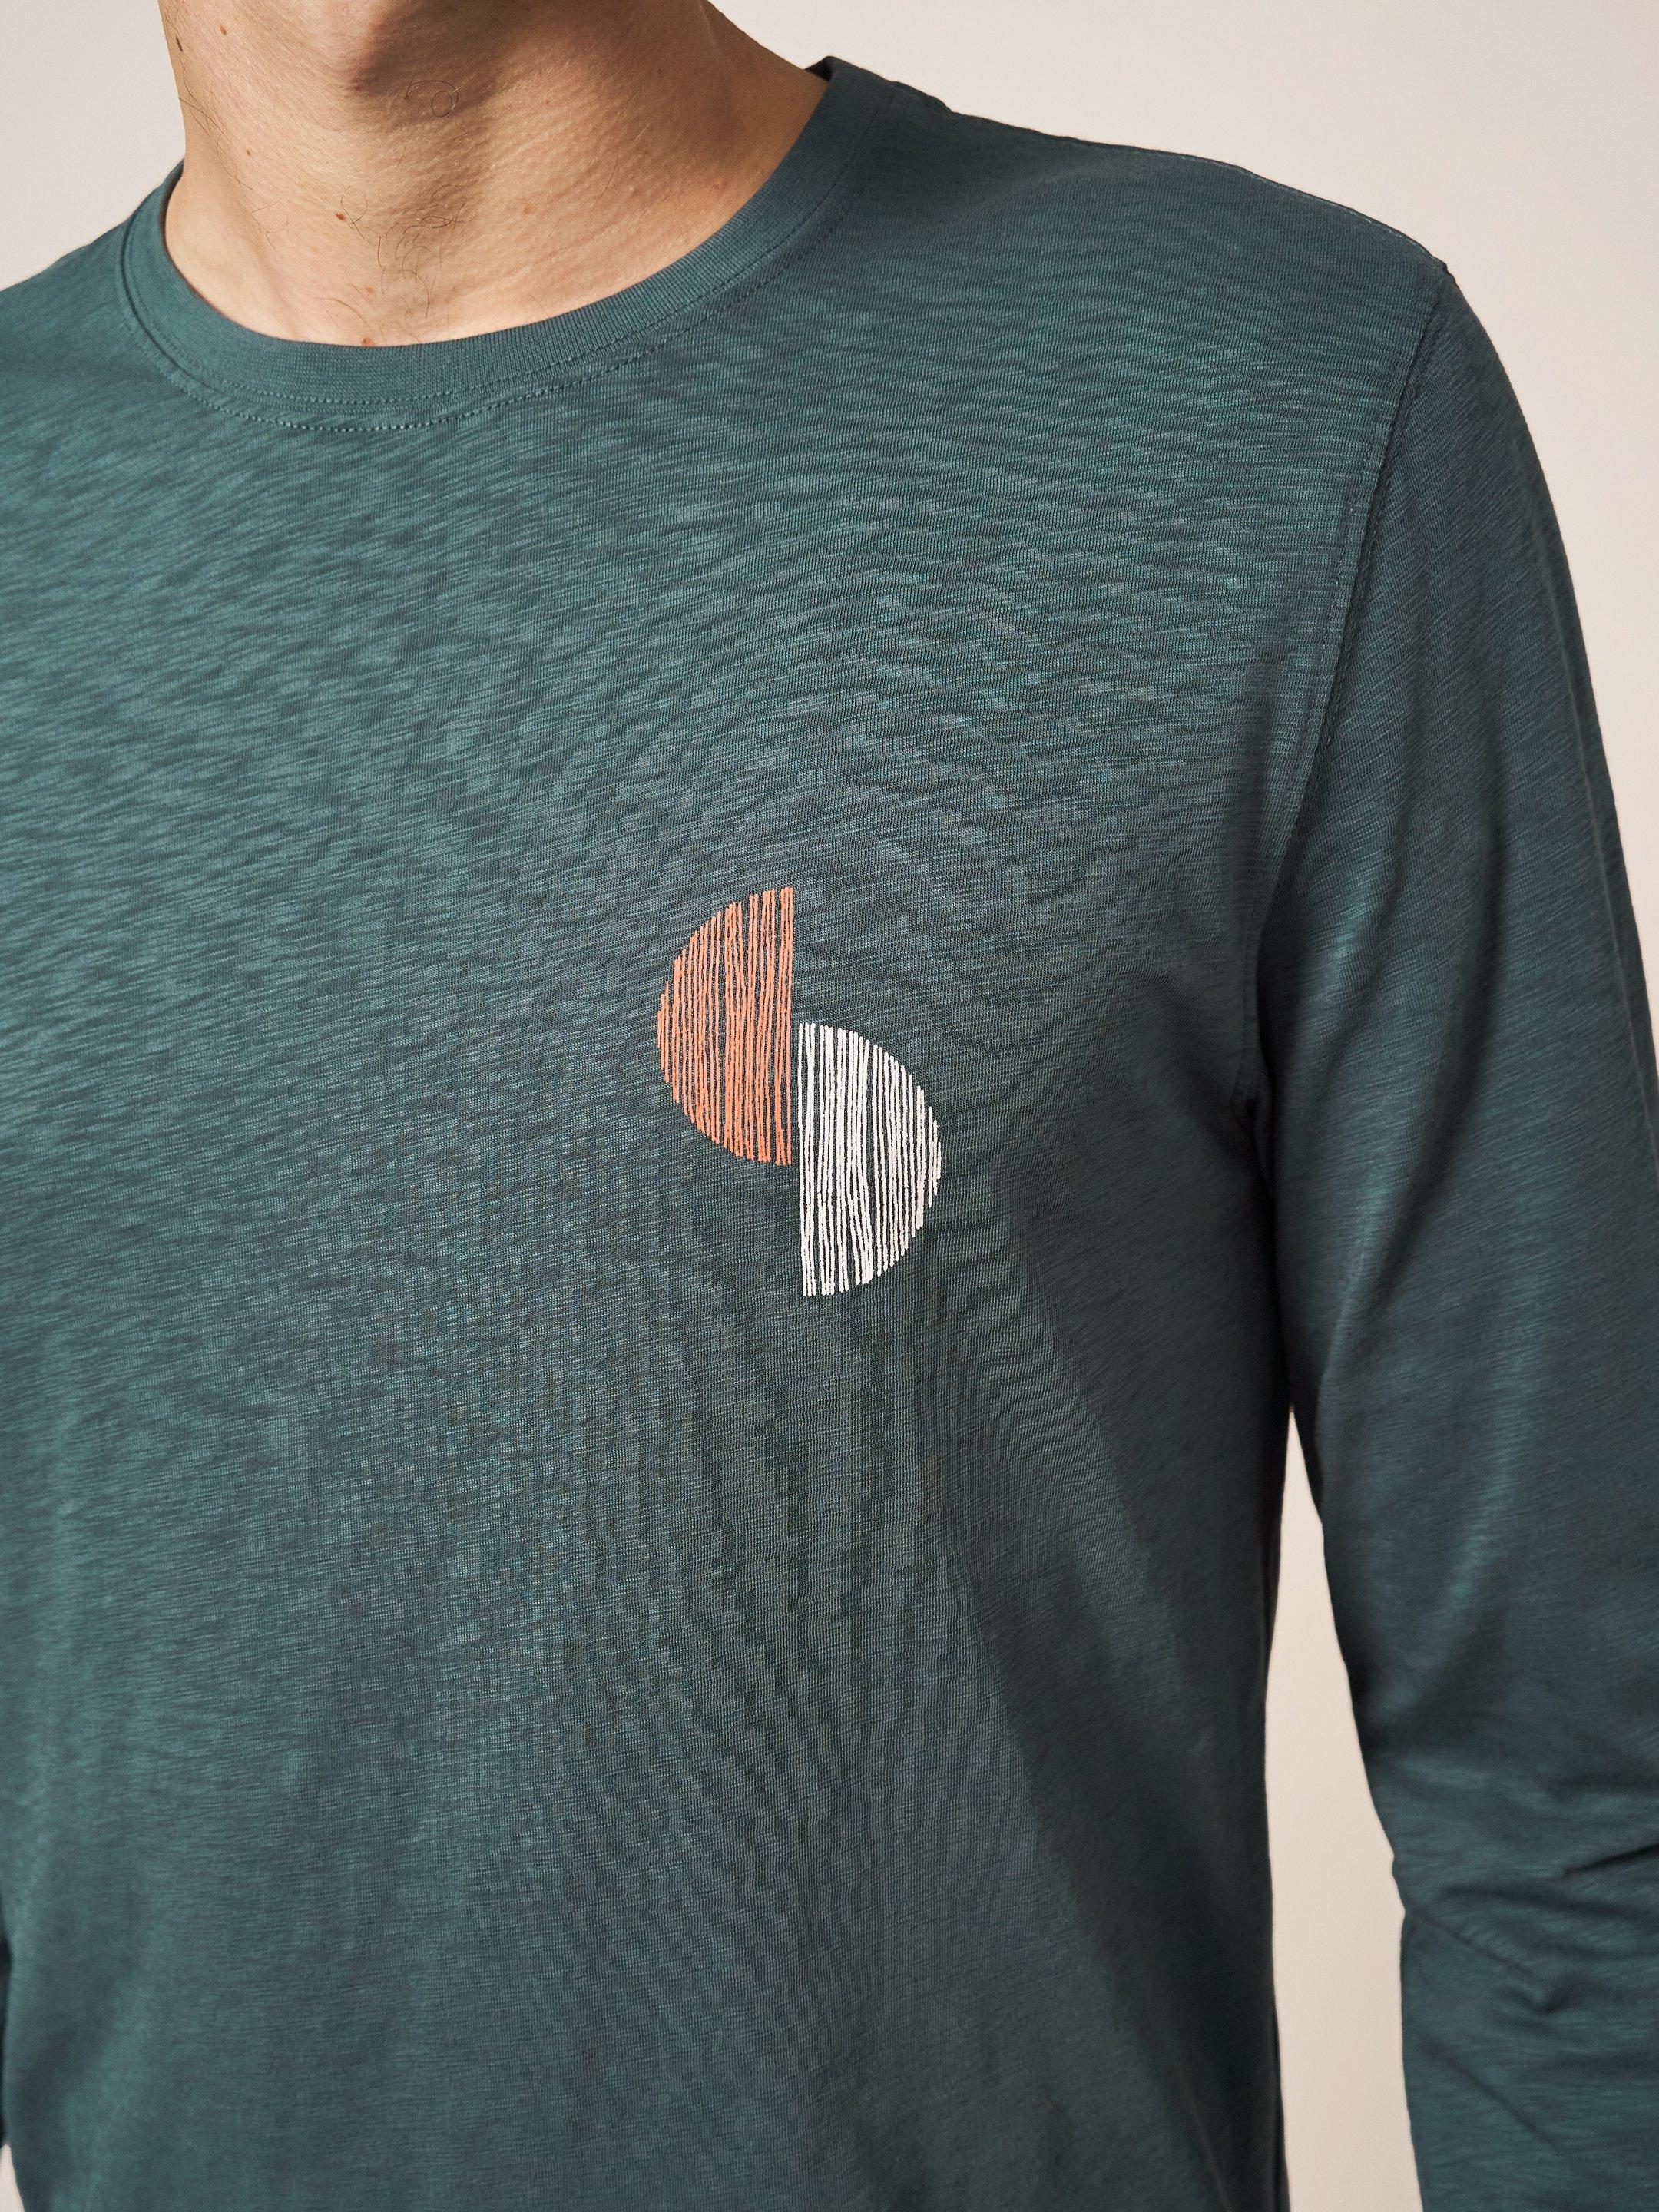 Abstract Art LS Graphic Tee in DARK TEAL - MODEL DETAIL